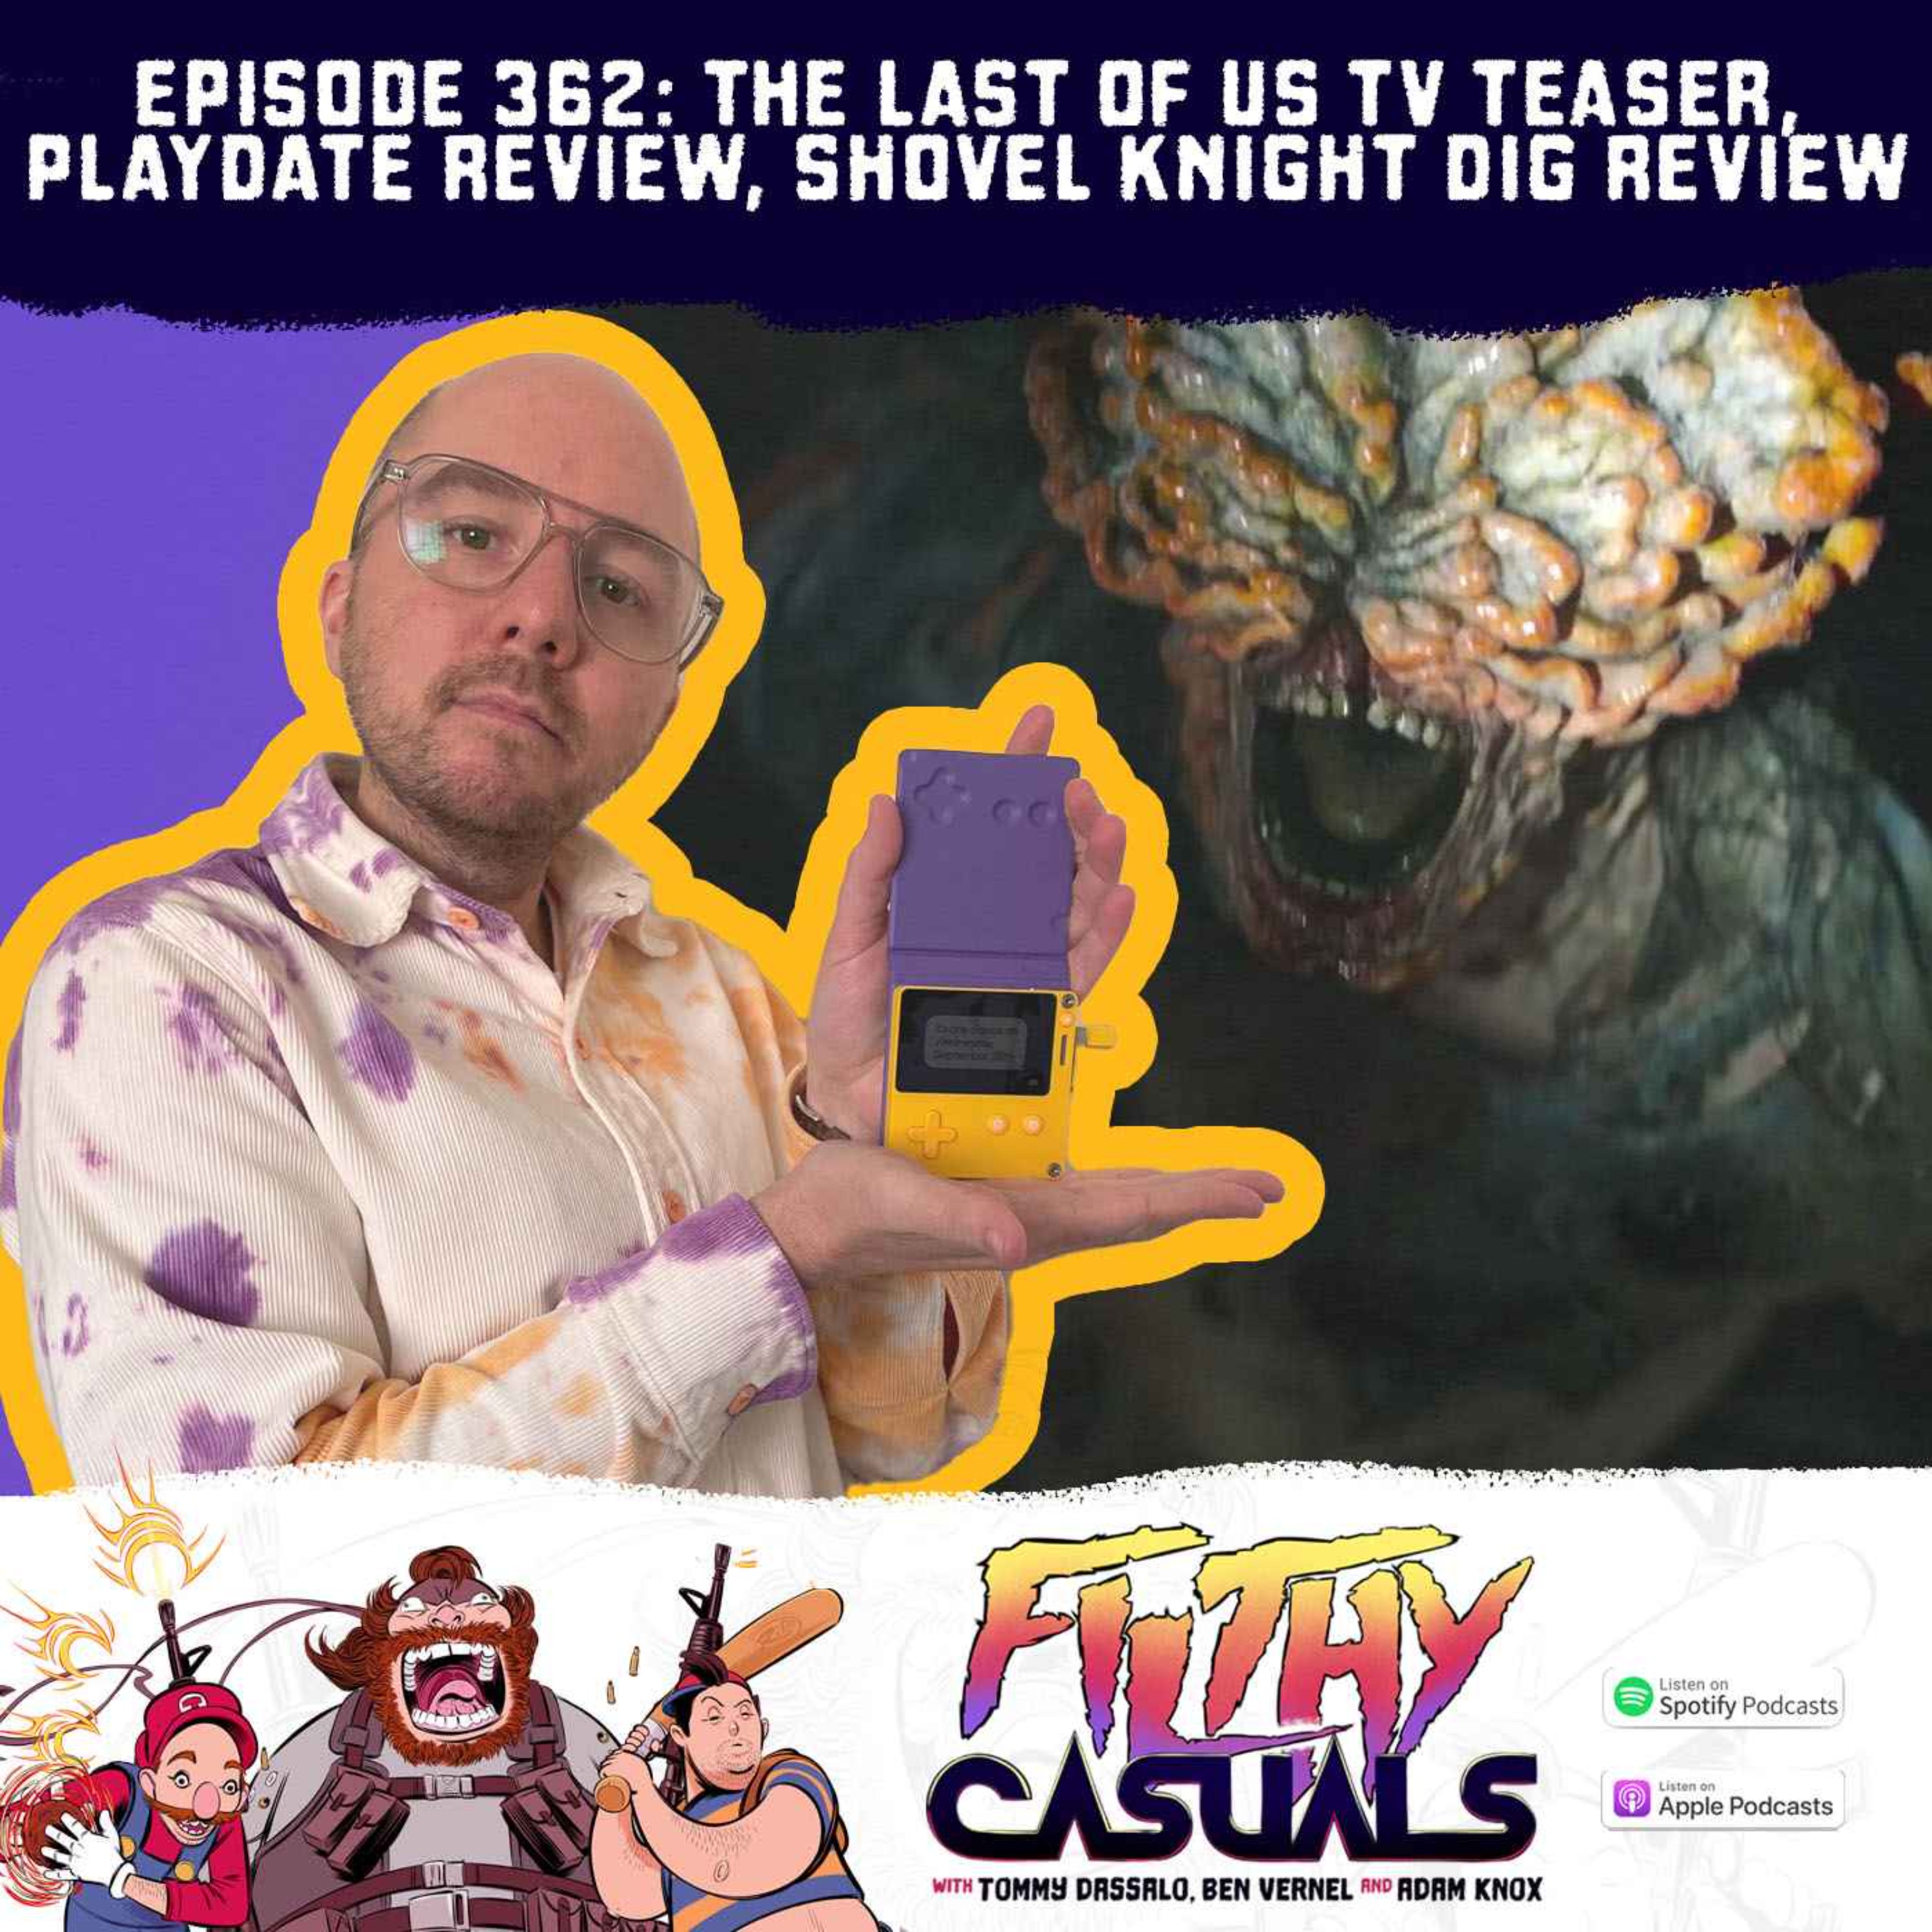 Episode 362: The Last Of Us TV Teaser, Playdate Review, Shovel Knight Dig Review